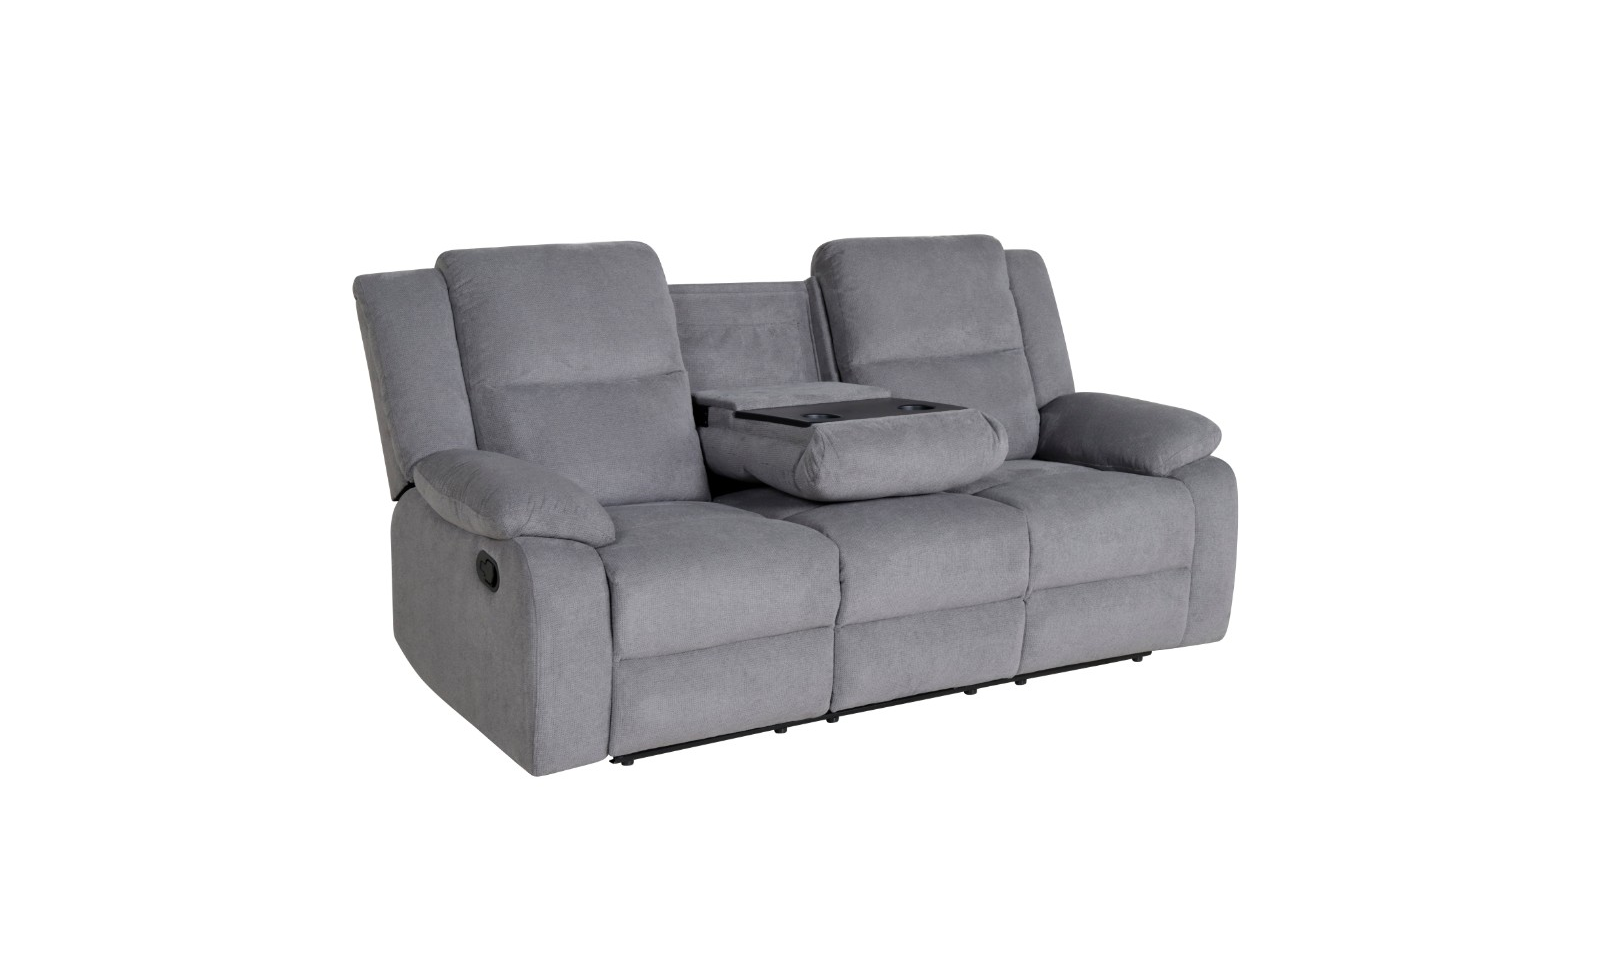 Rancher 2 Seater Recliner Fabric Sofa With Tray Lounge - Mid Grey